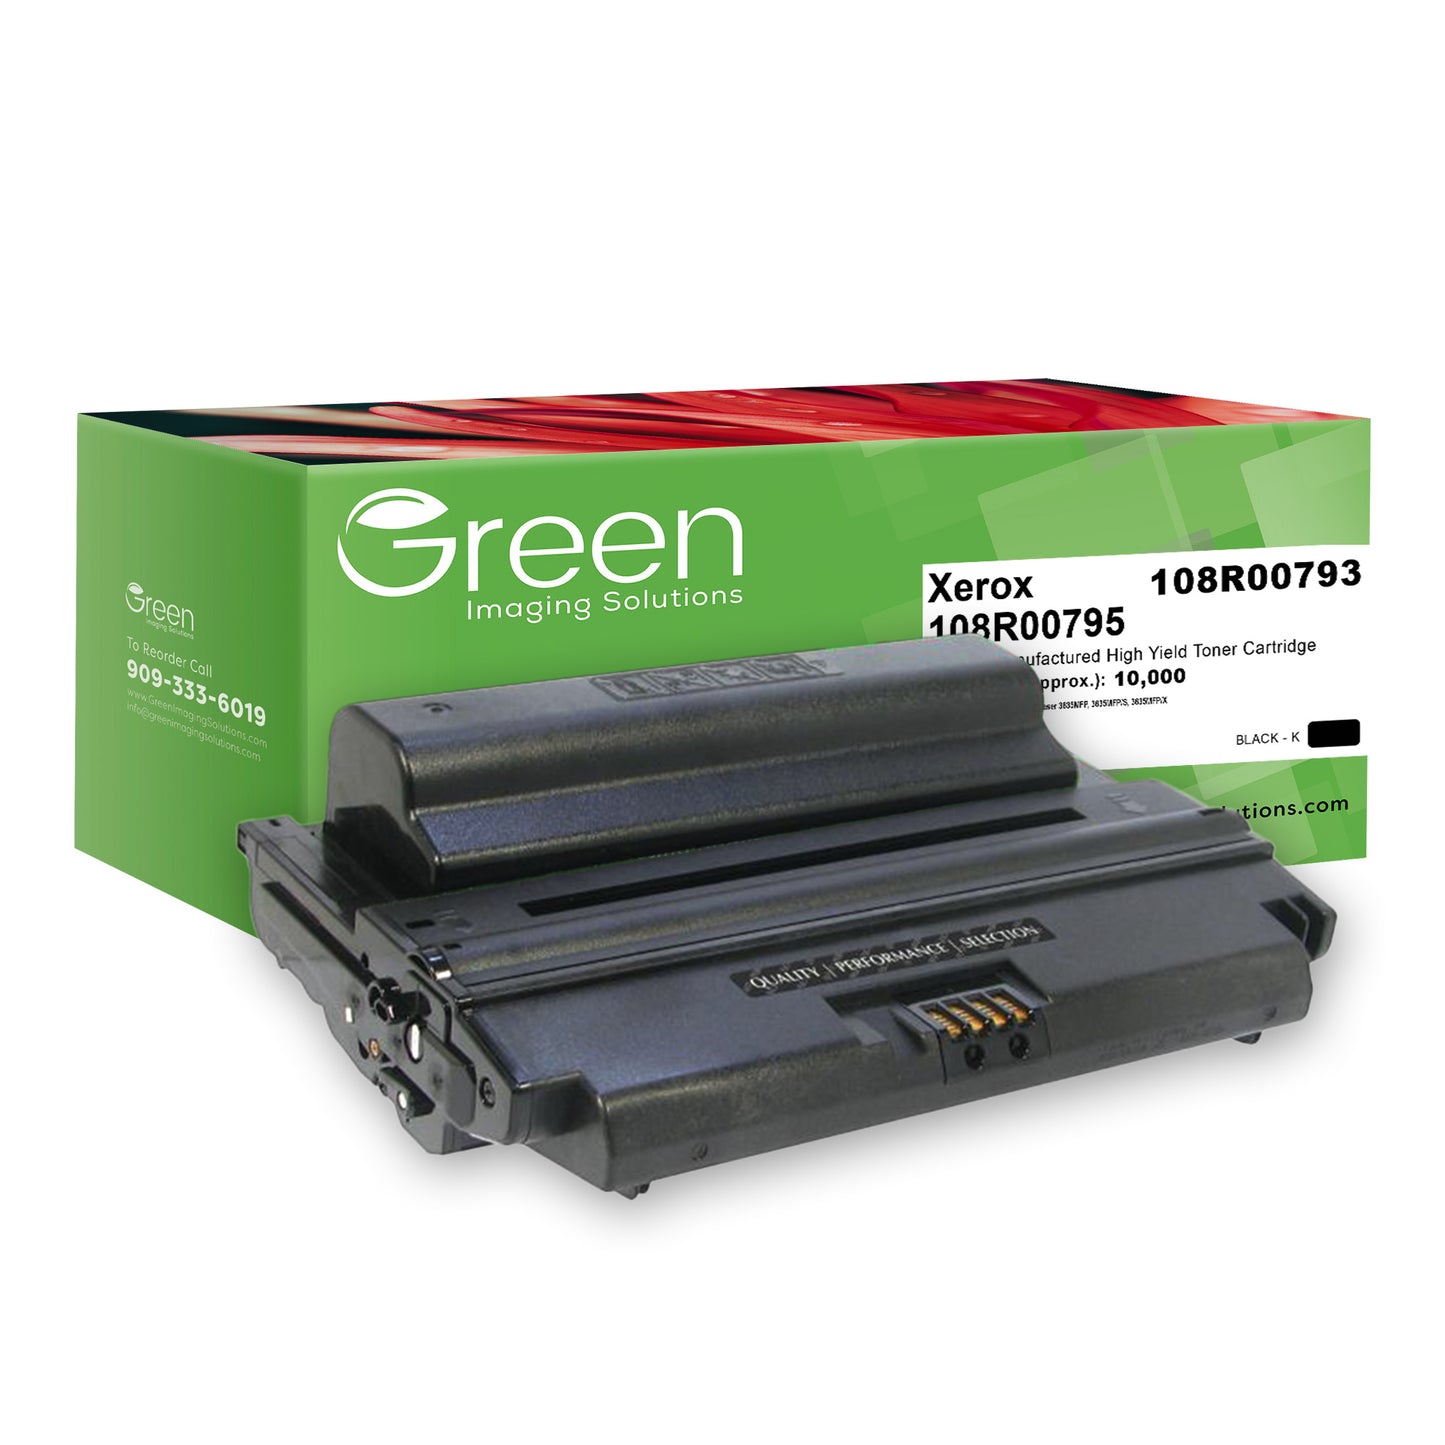 Green Imaging Solutions USA Remanufactured High Yield Toner Cartridge for Xerox 108R00795/108R00793